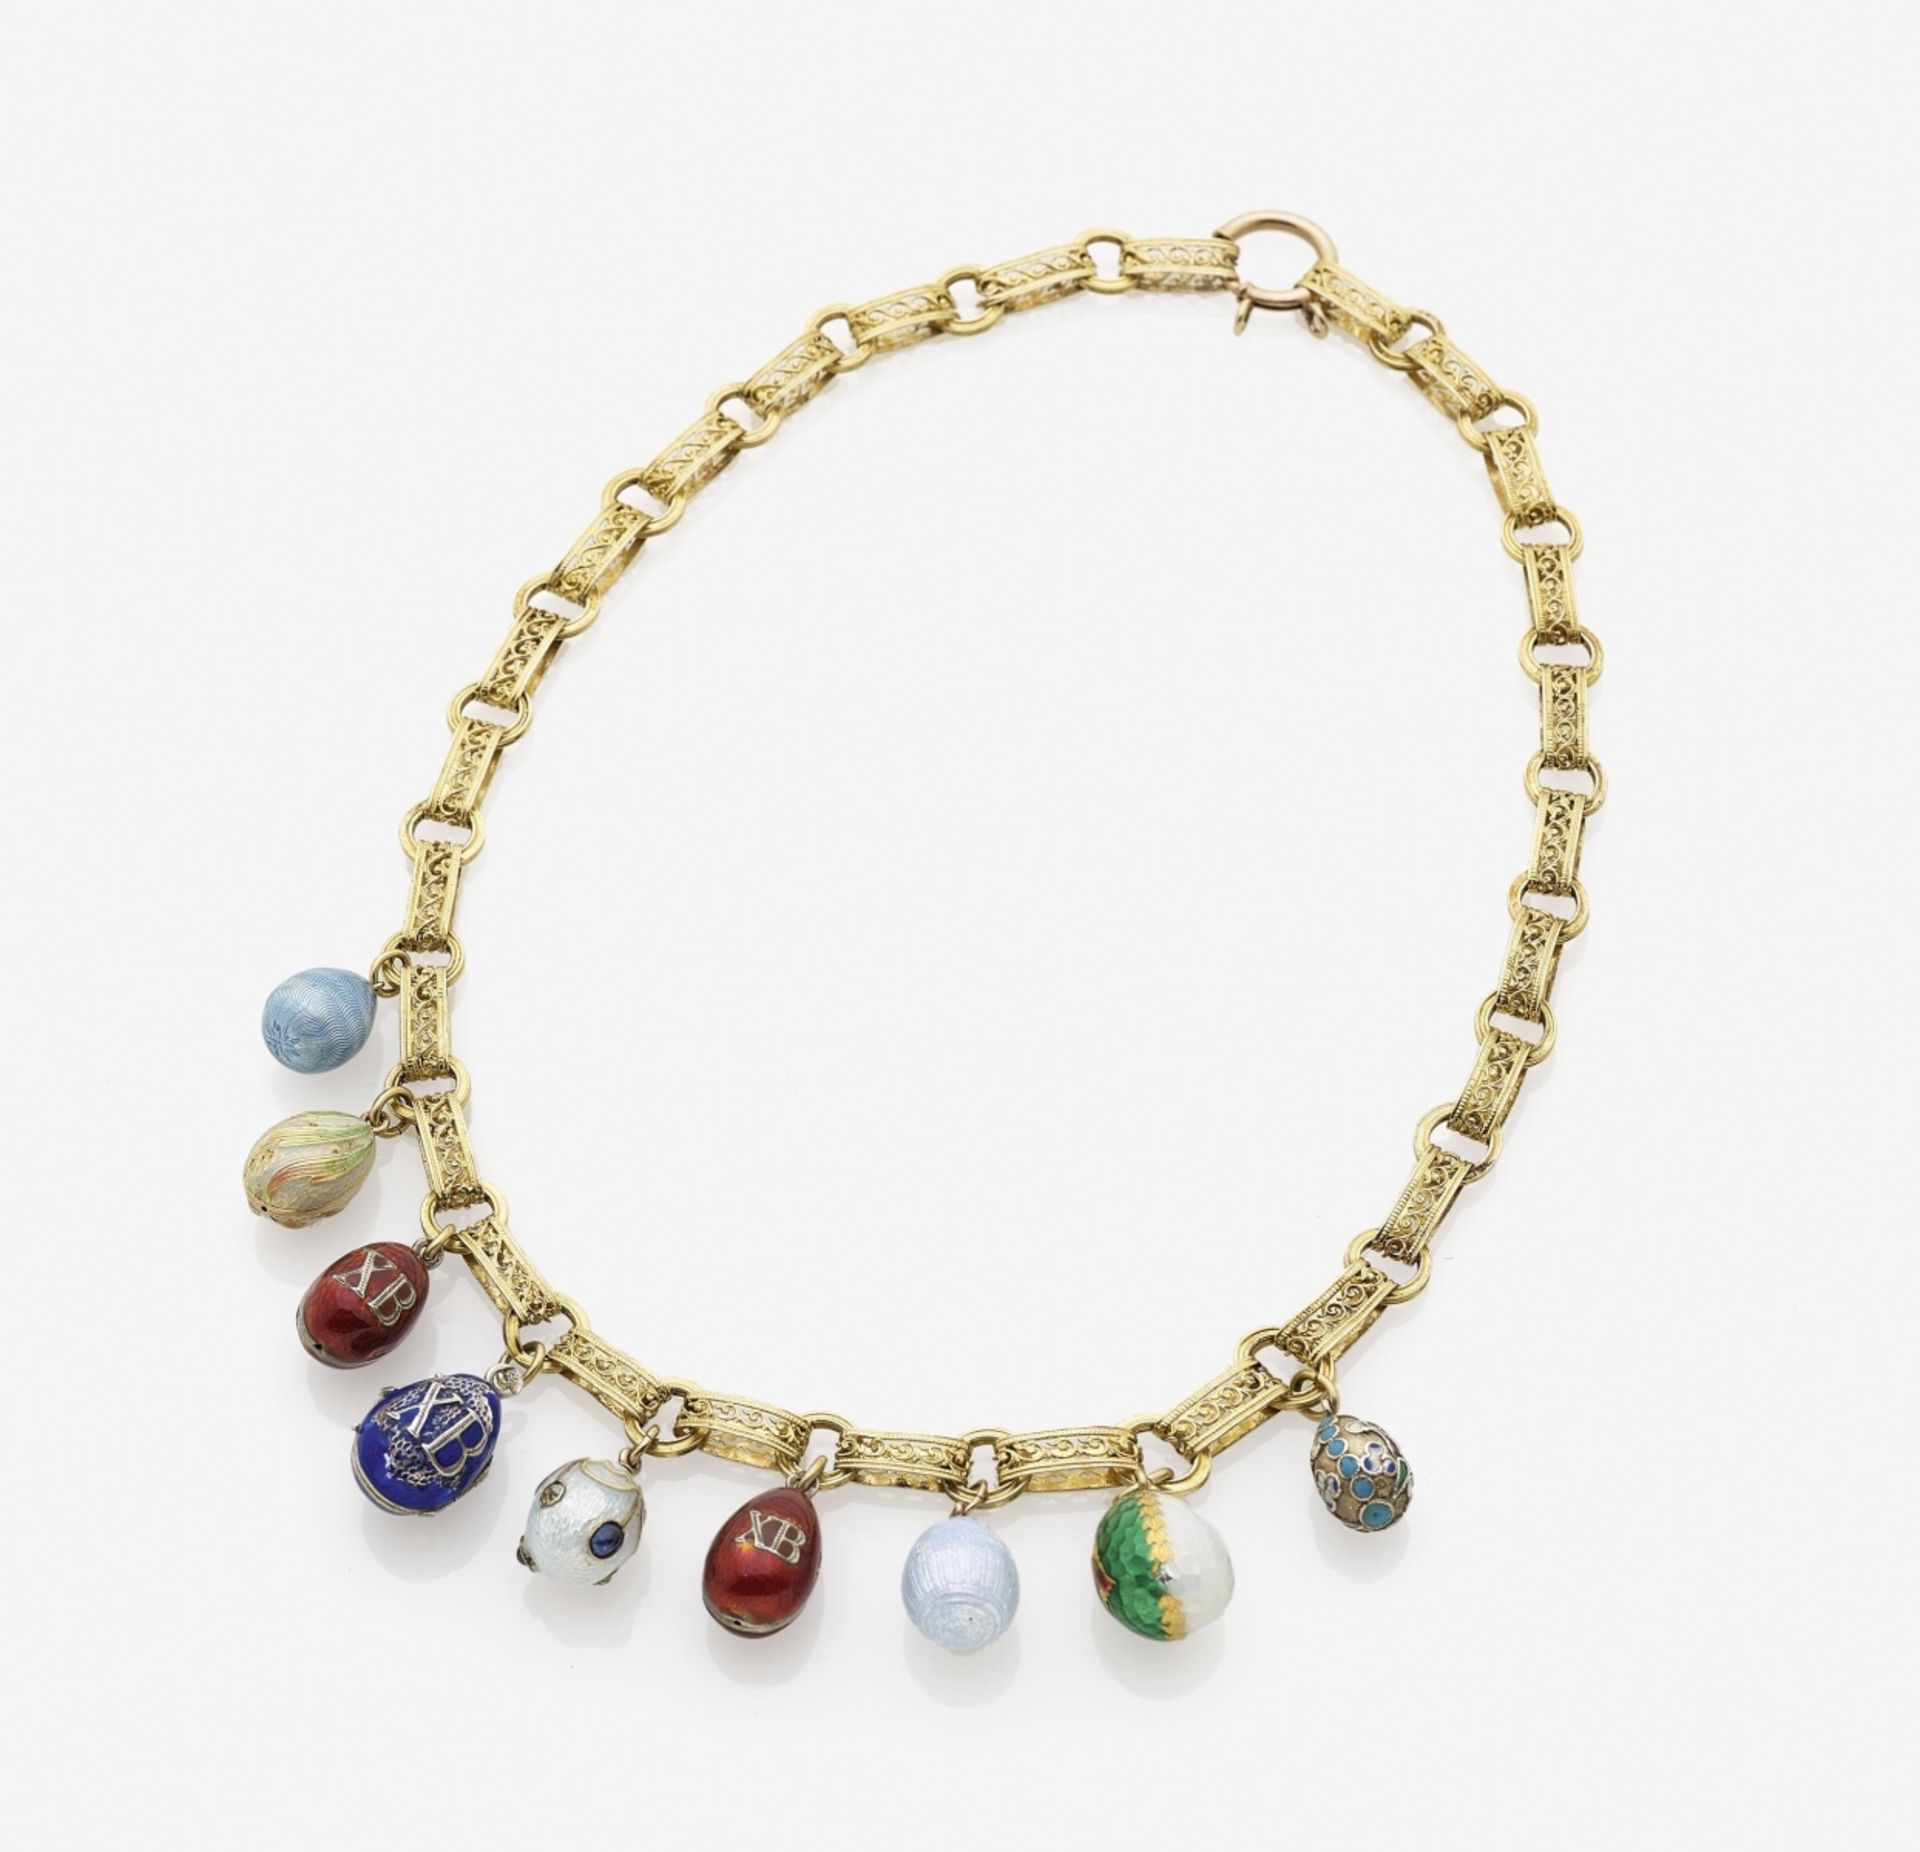 A Necklace with Nine Enamel Egg PendantsSt. Petersburg, 1899-1908, FABERGÉ Gold 584/-, tested and